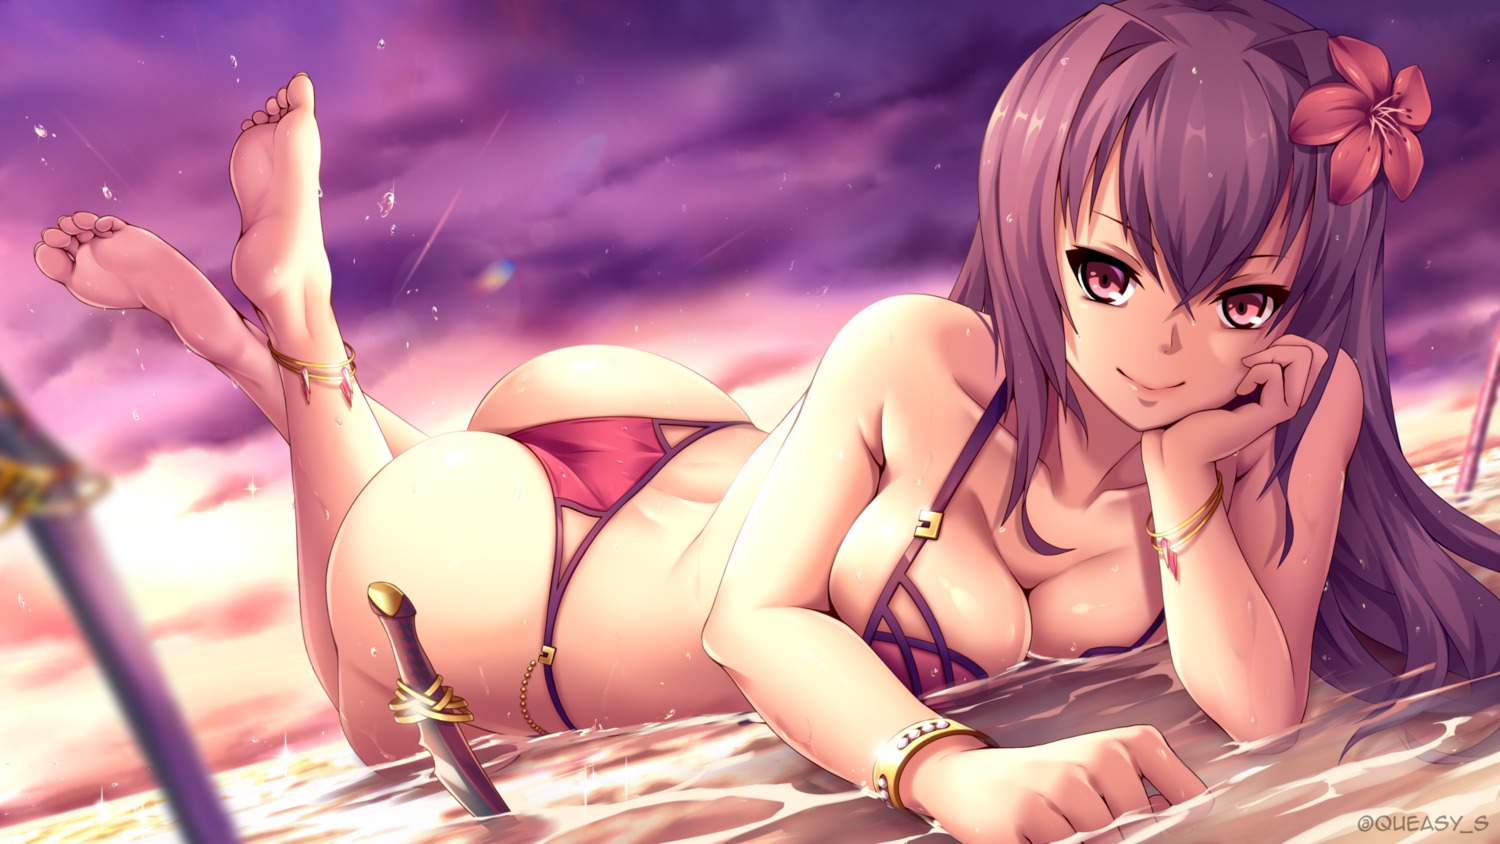 bikini fate/grand_order feet queasy_s scathach_(fate/grand_order) swimsuits thong wallpaper weapon wet